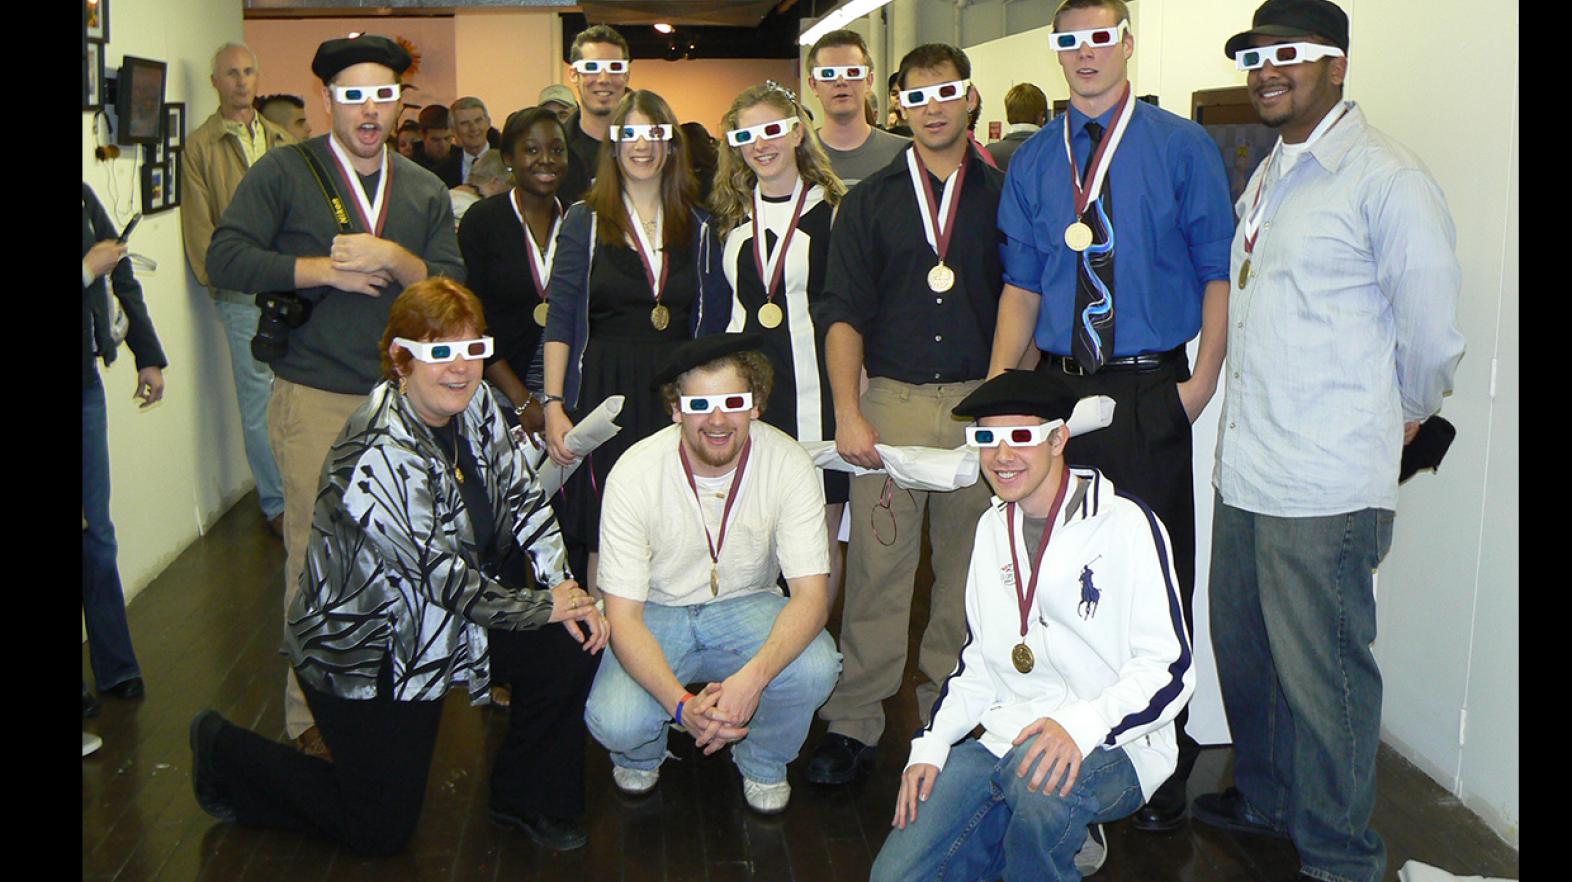 Students and Professor Ruth West pose in 3D sunglasses after a presentation using 3D technology during the annual senior art show.